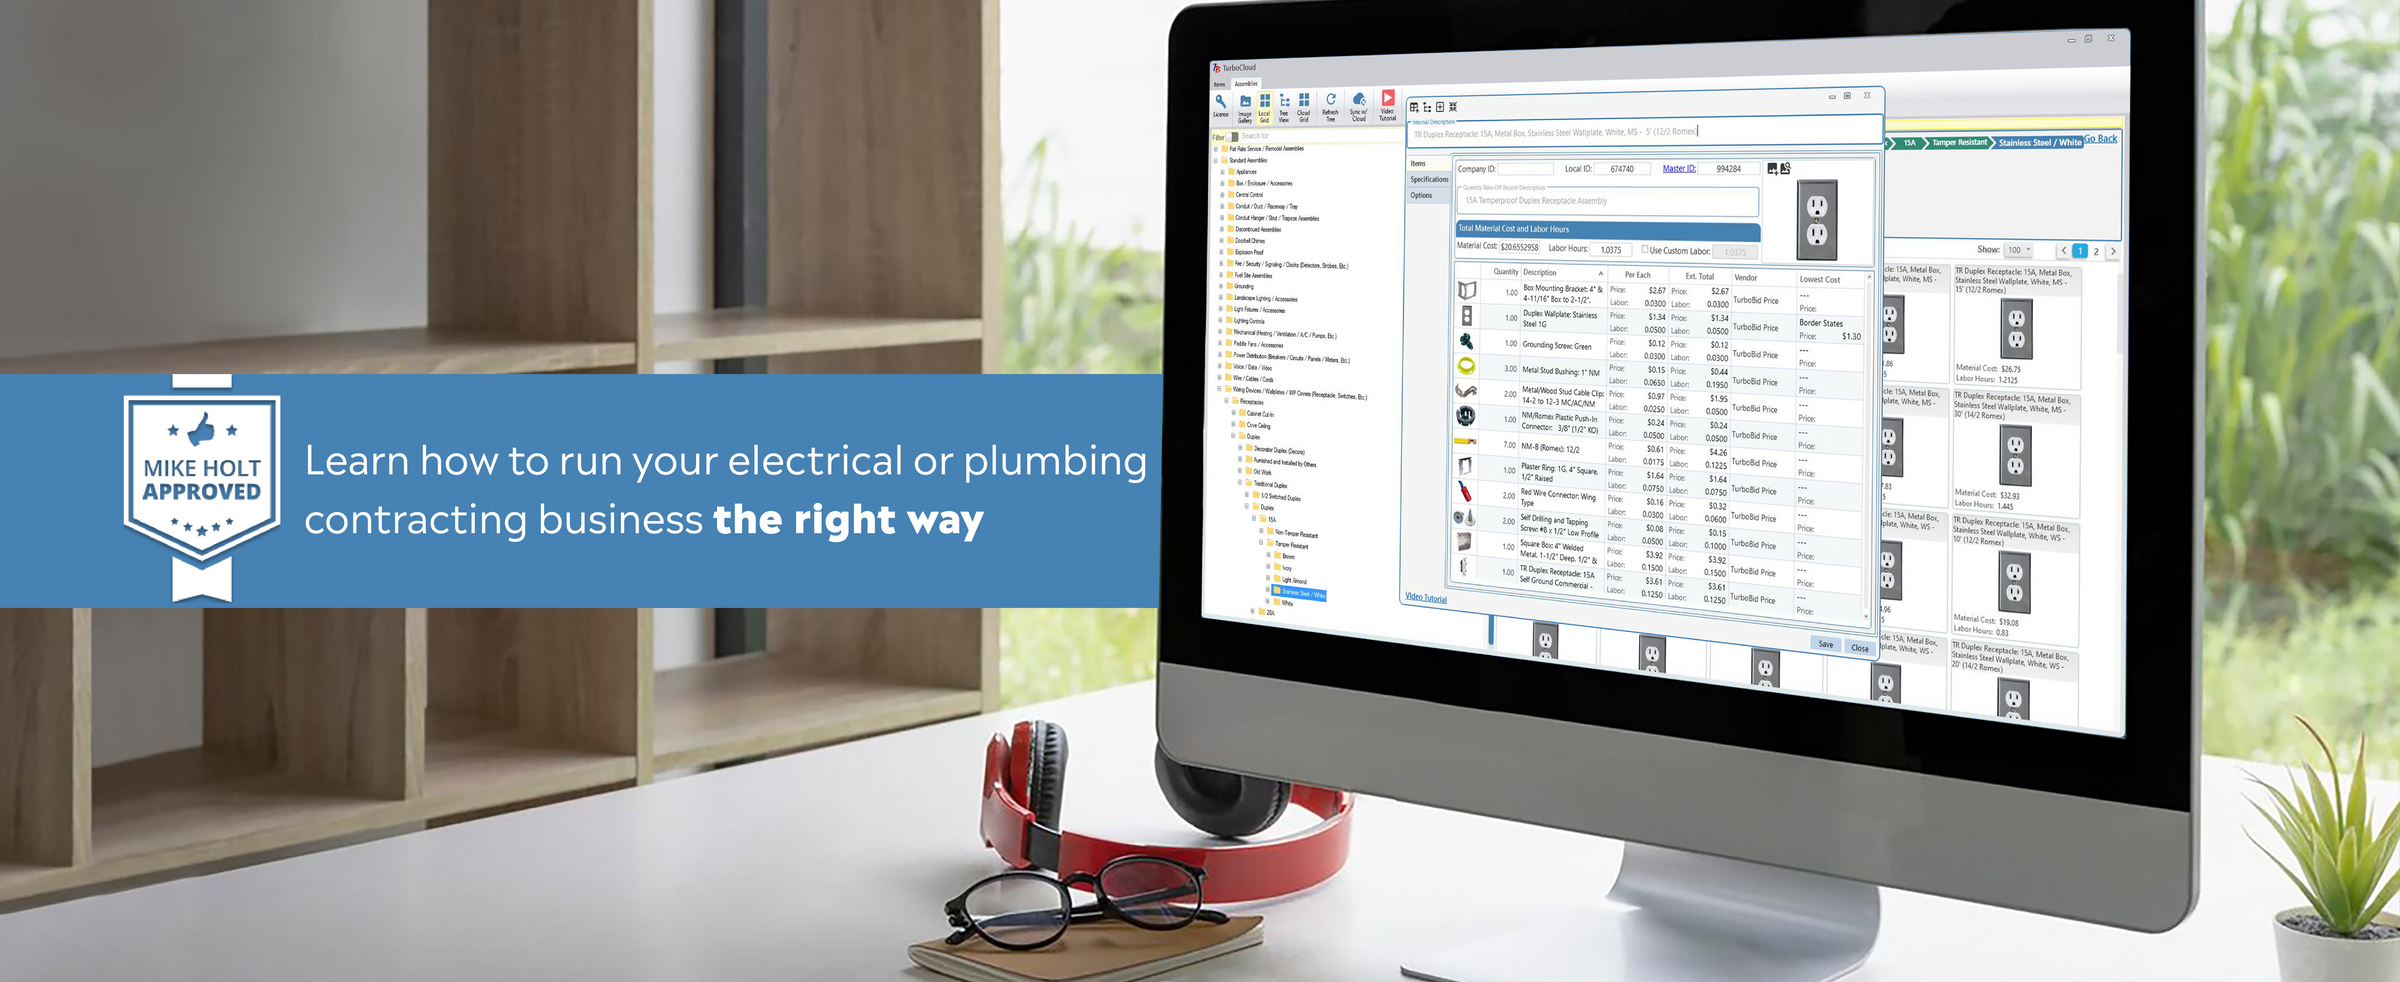 Monitor with TurboBid estimating software and Learn how to run your electrical or plumbing contracting business the right way